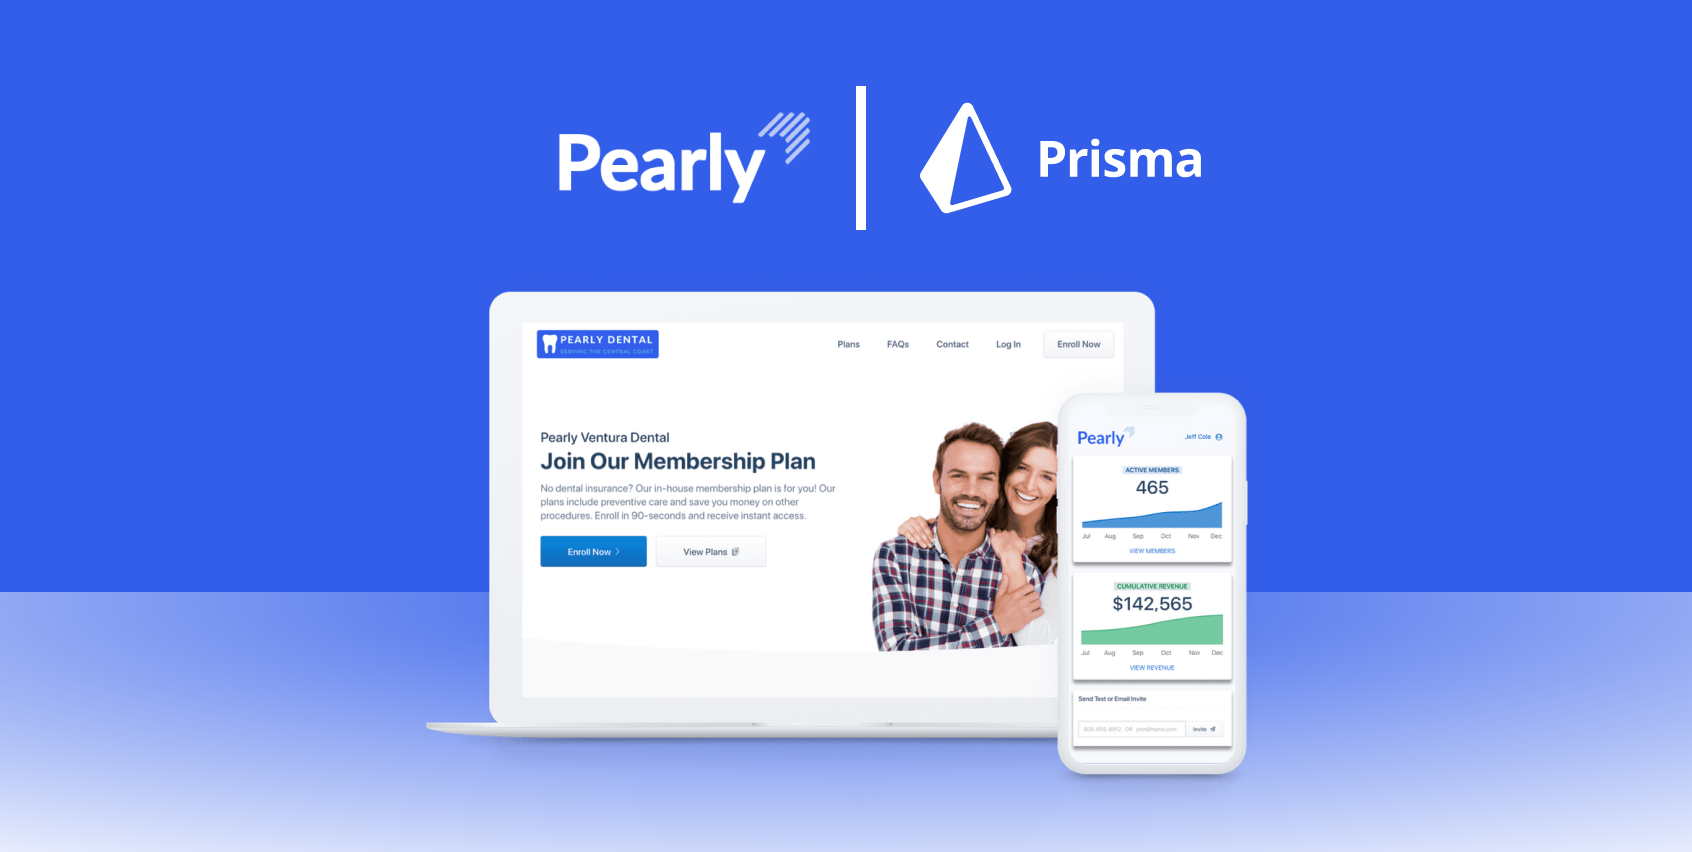 How Prisma Allowed Pearly to Scale Quickly with an Ultra-Lean Team